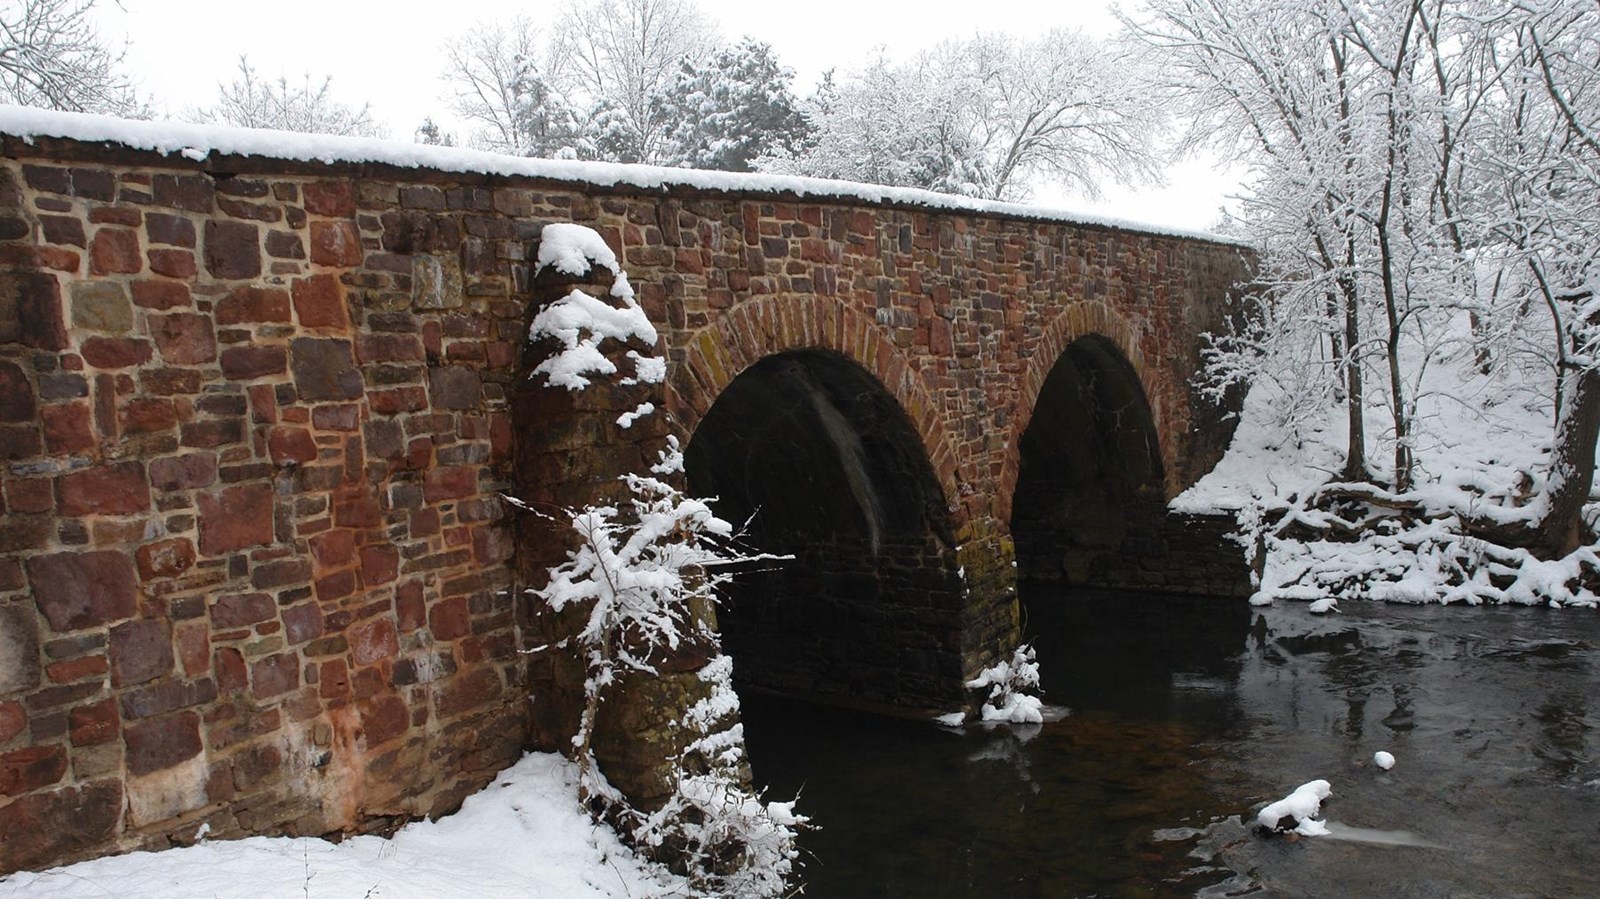 Stone Bridge with snow on it and the banks of Bull Run